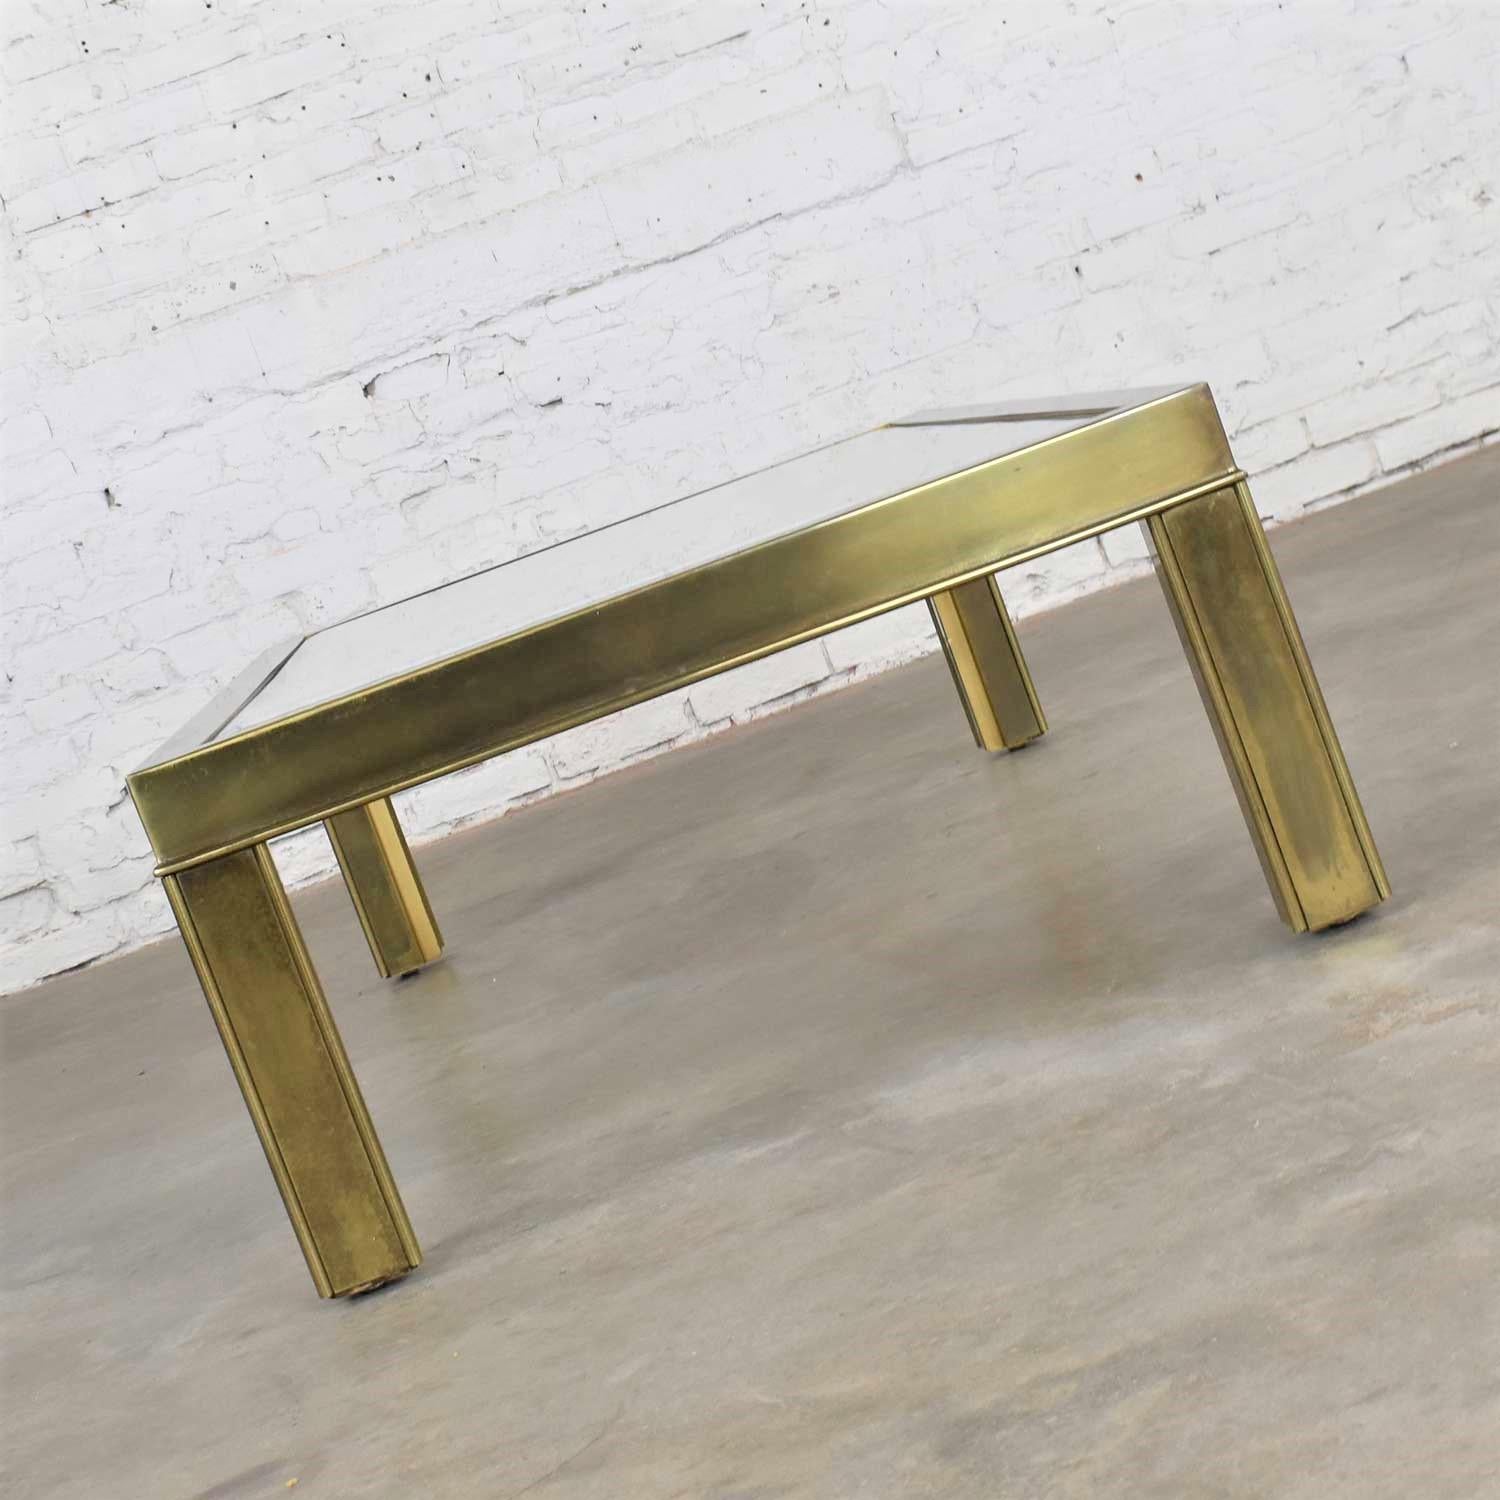 20th Century Modern Brass & Glass Parsons Style Coffee or Cocktail Table Style Mastercraft